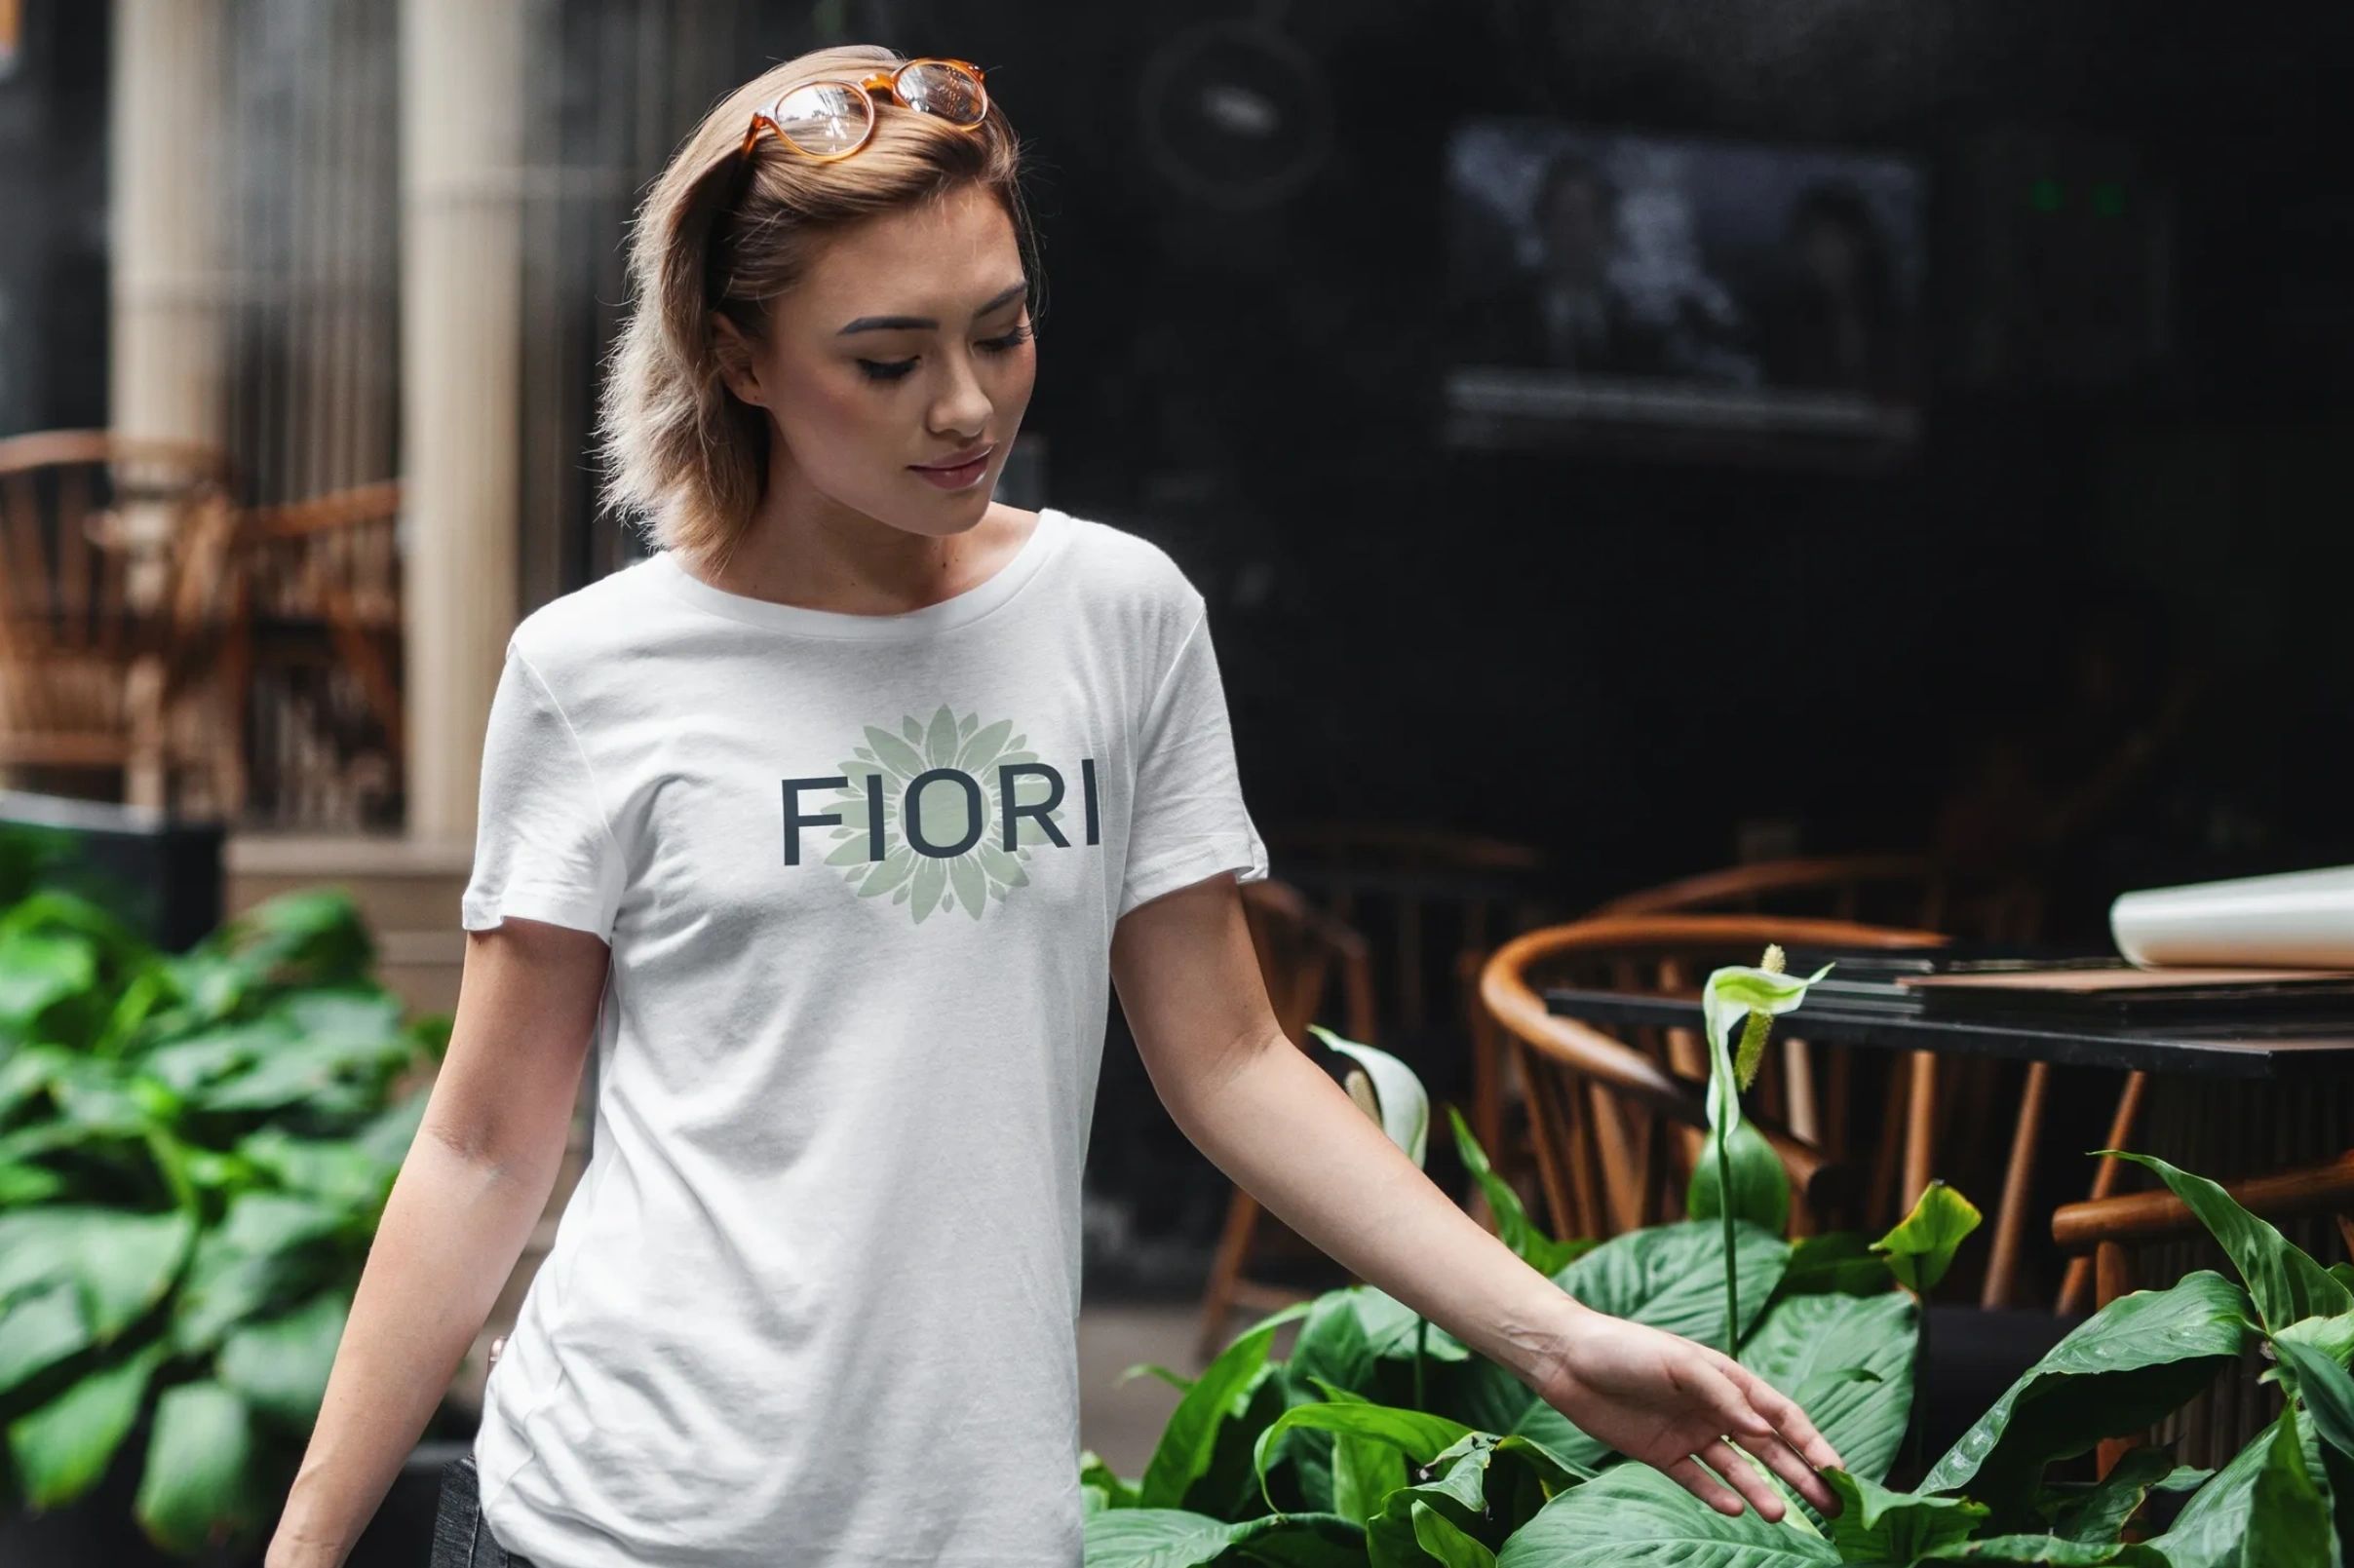 A model wearing a Fiori branded t-shirt